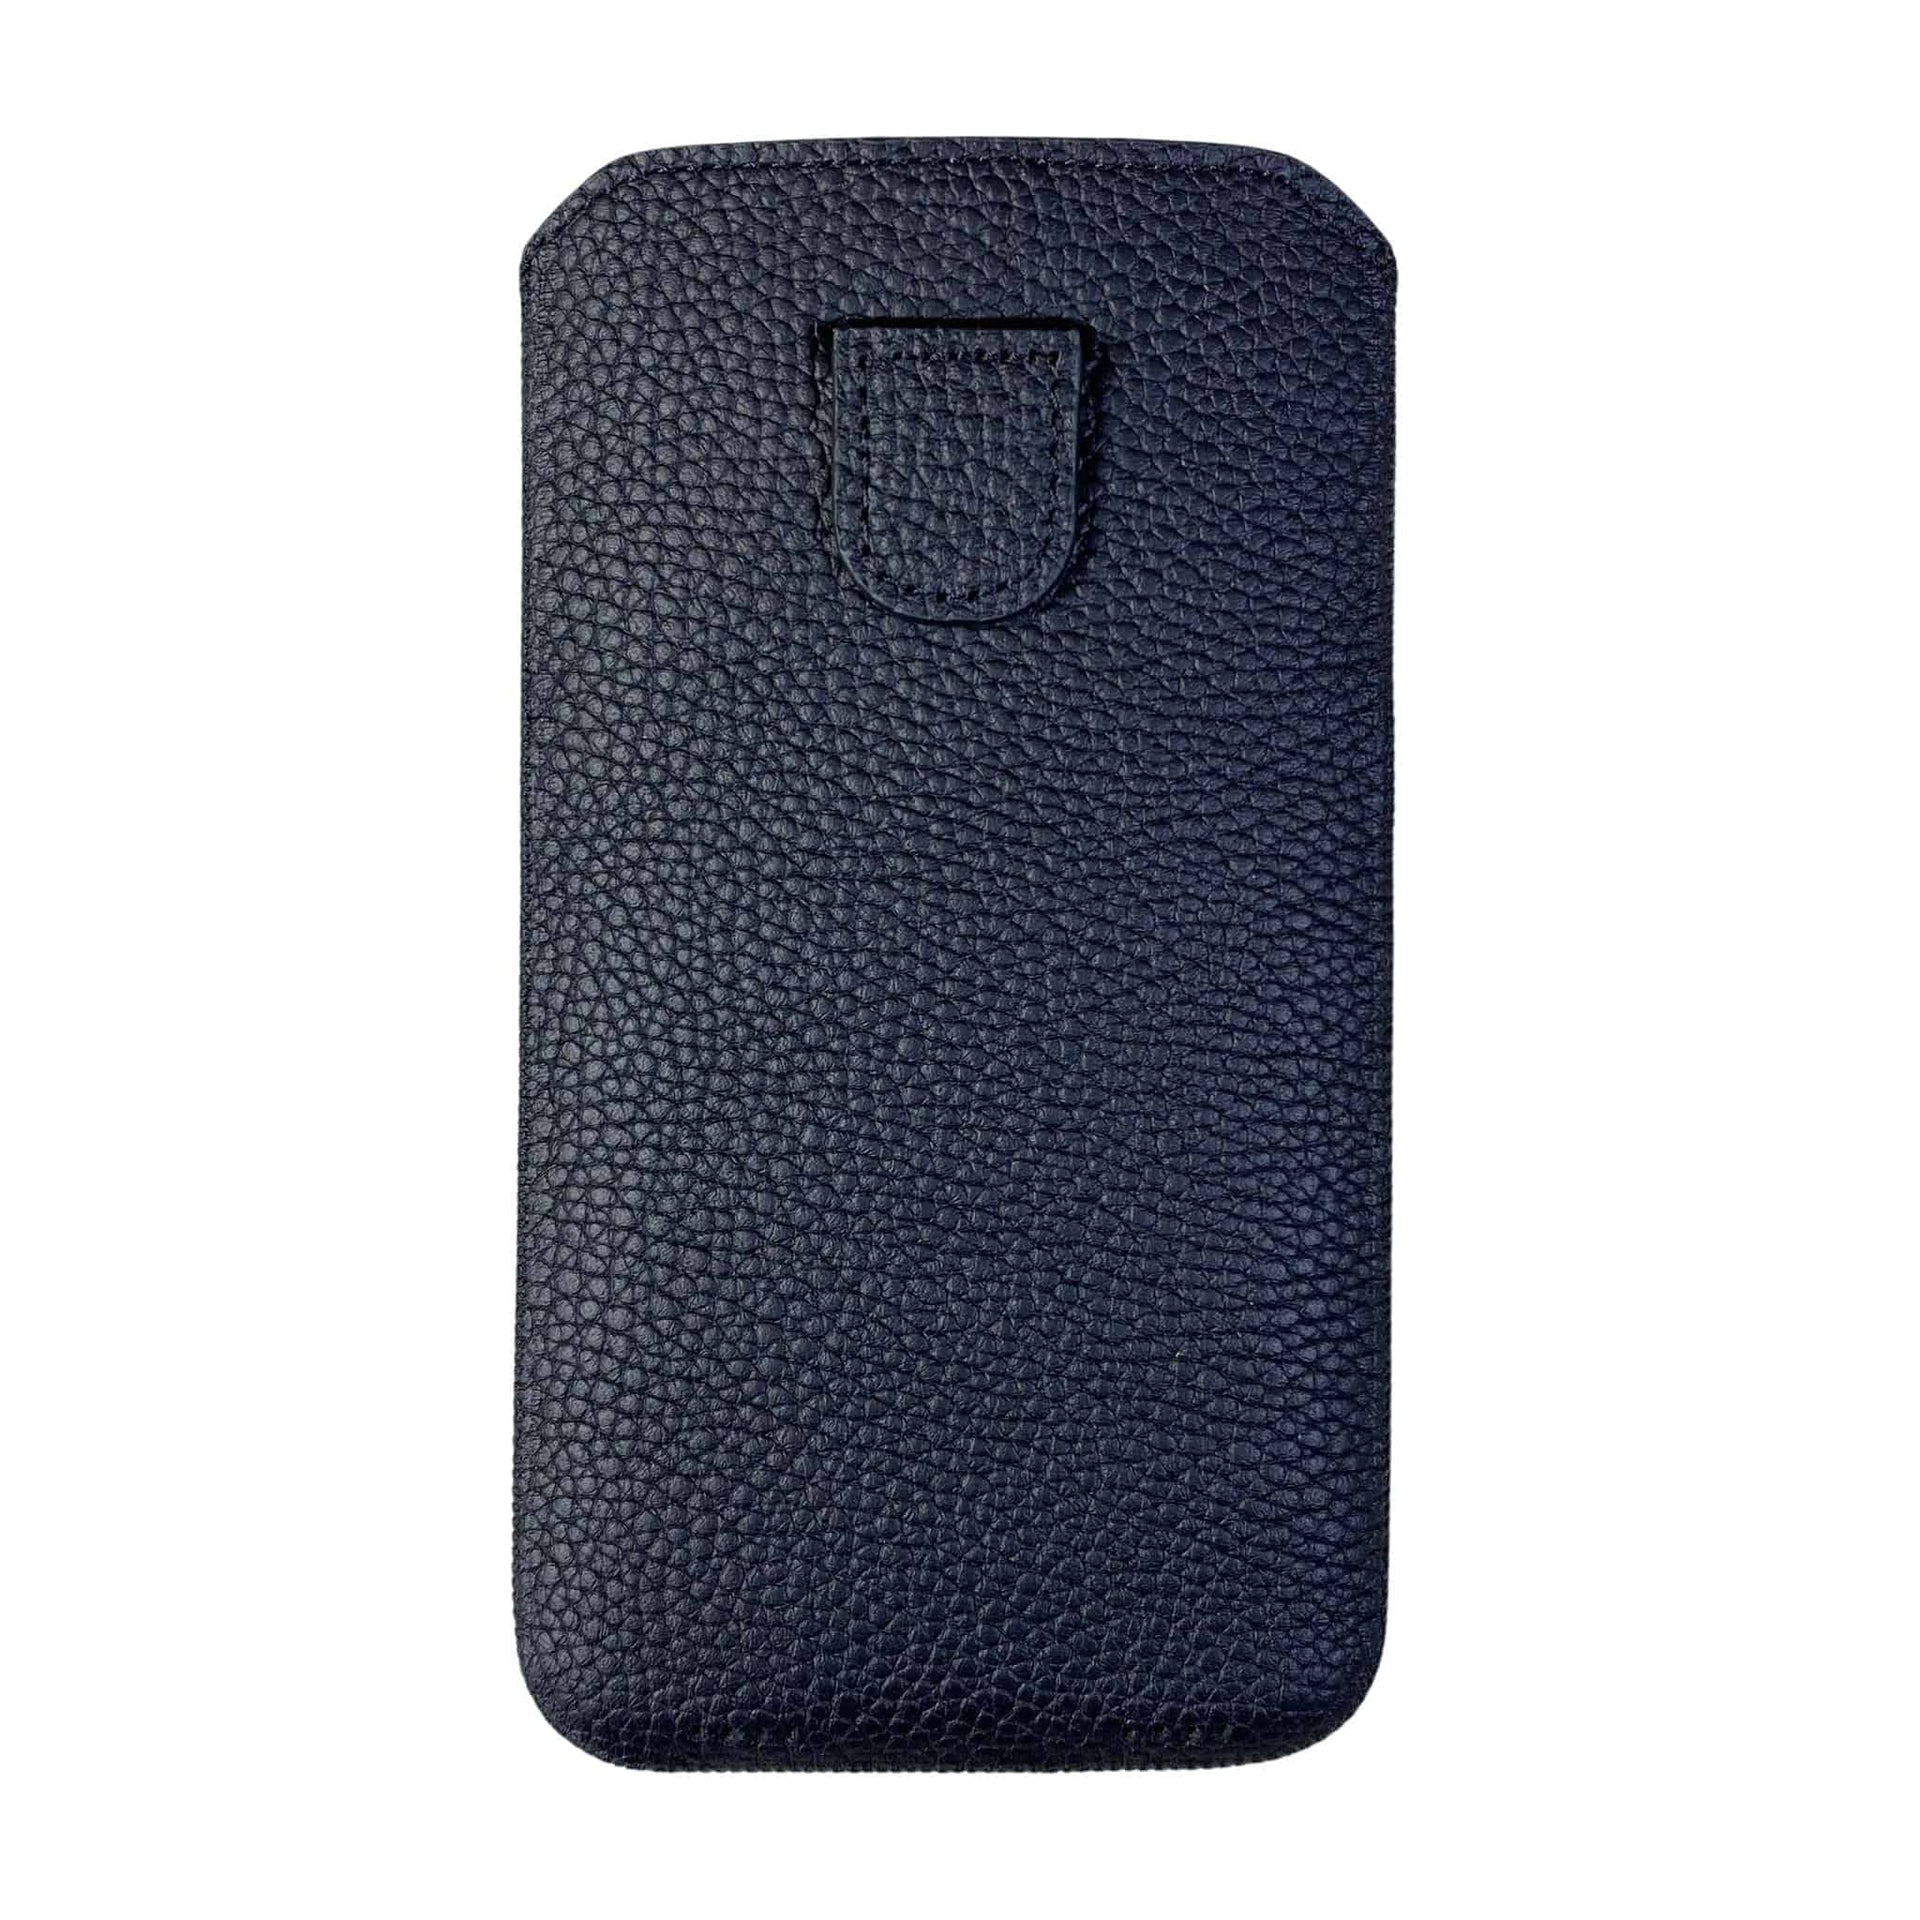 Samsung Galaxy S21 Ultra Genuine Leather Pouch Case